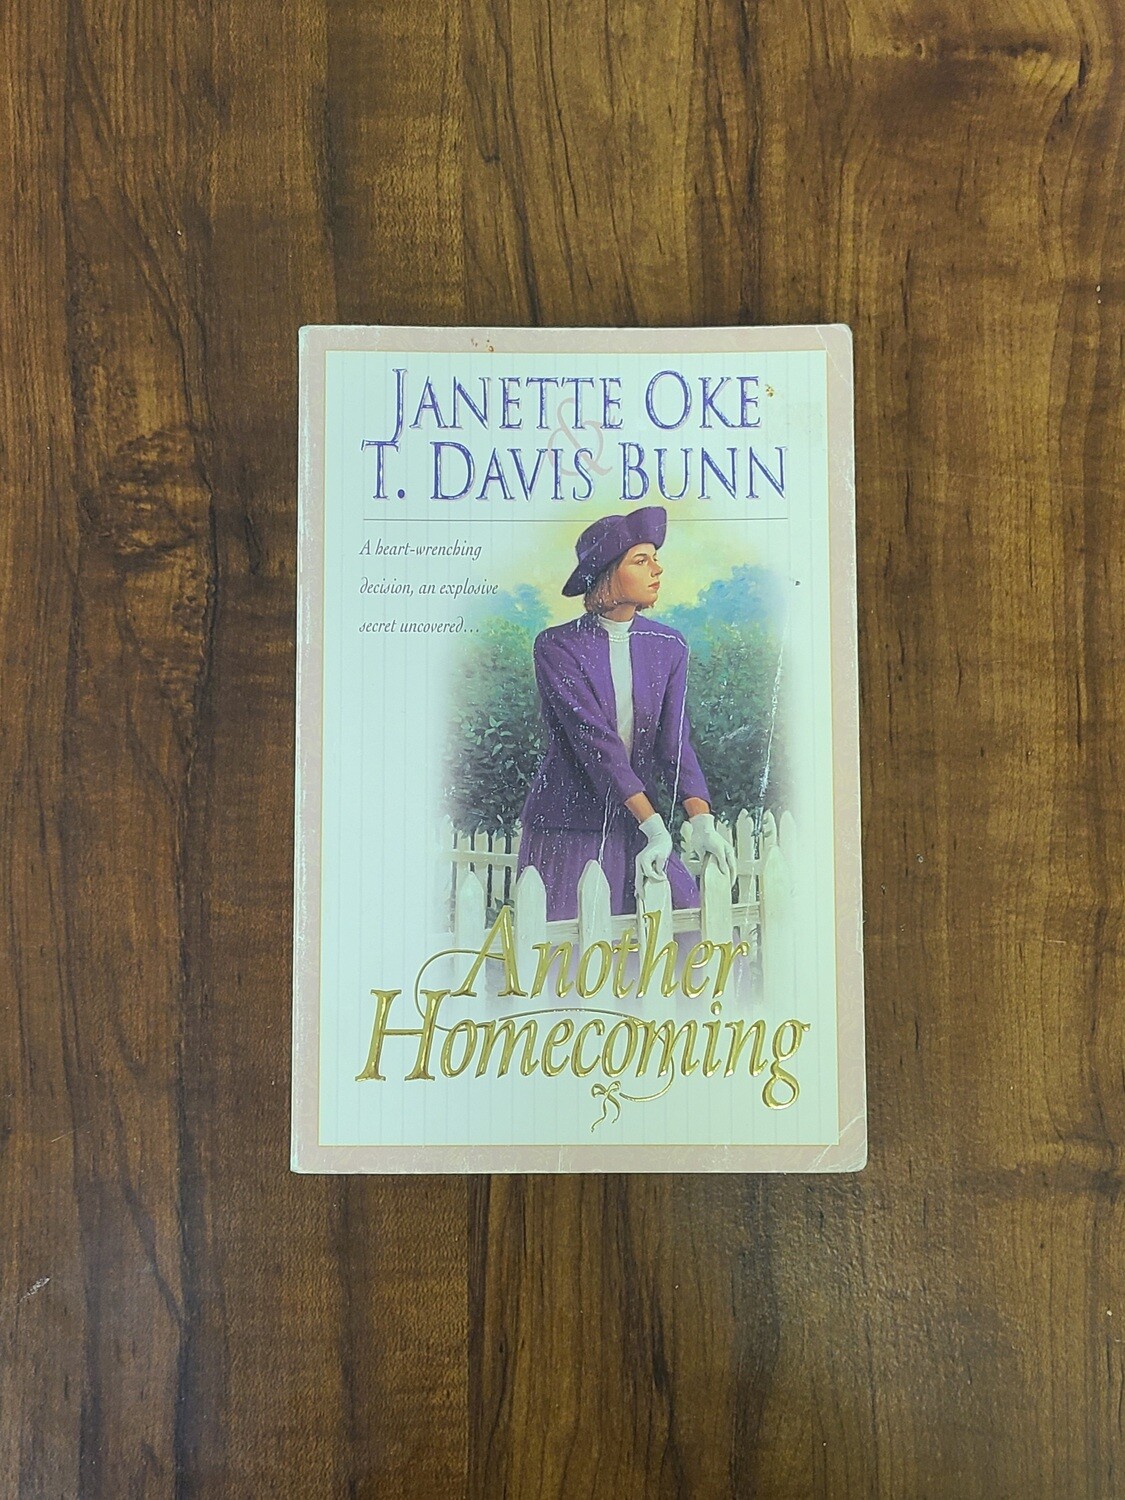 Another Homecoming by Janette Oke and T. Davis Bunn